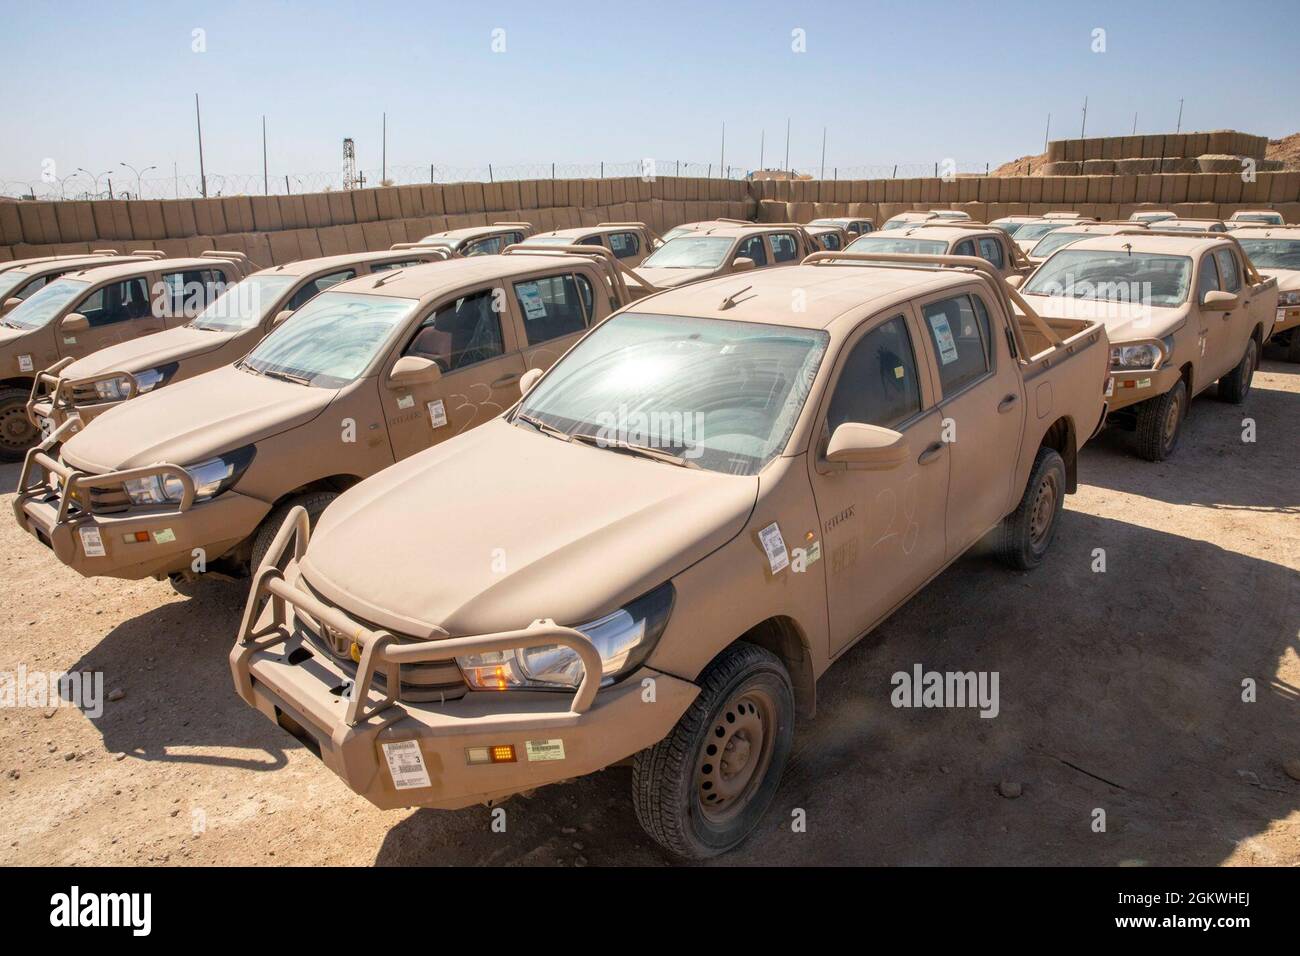 Thirty-five four door passenger vehicles sit lined up for a divestment to the Ministry of Interior (MOI) on Al Asad Airbase, Iraq, July 10, 2021. The equipment divested to the MOI included 35 four door motor vehicles and 15 backhoe loaders worth over all 2.5 million dollars. Stock Photo